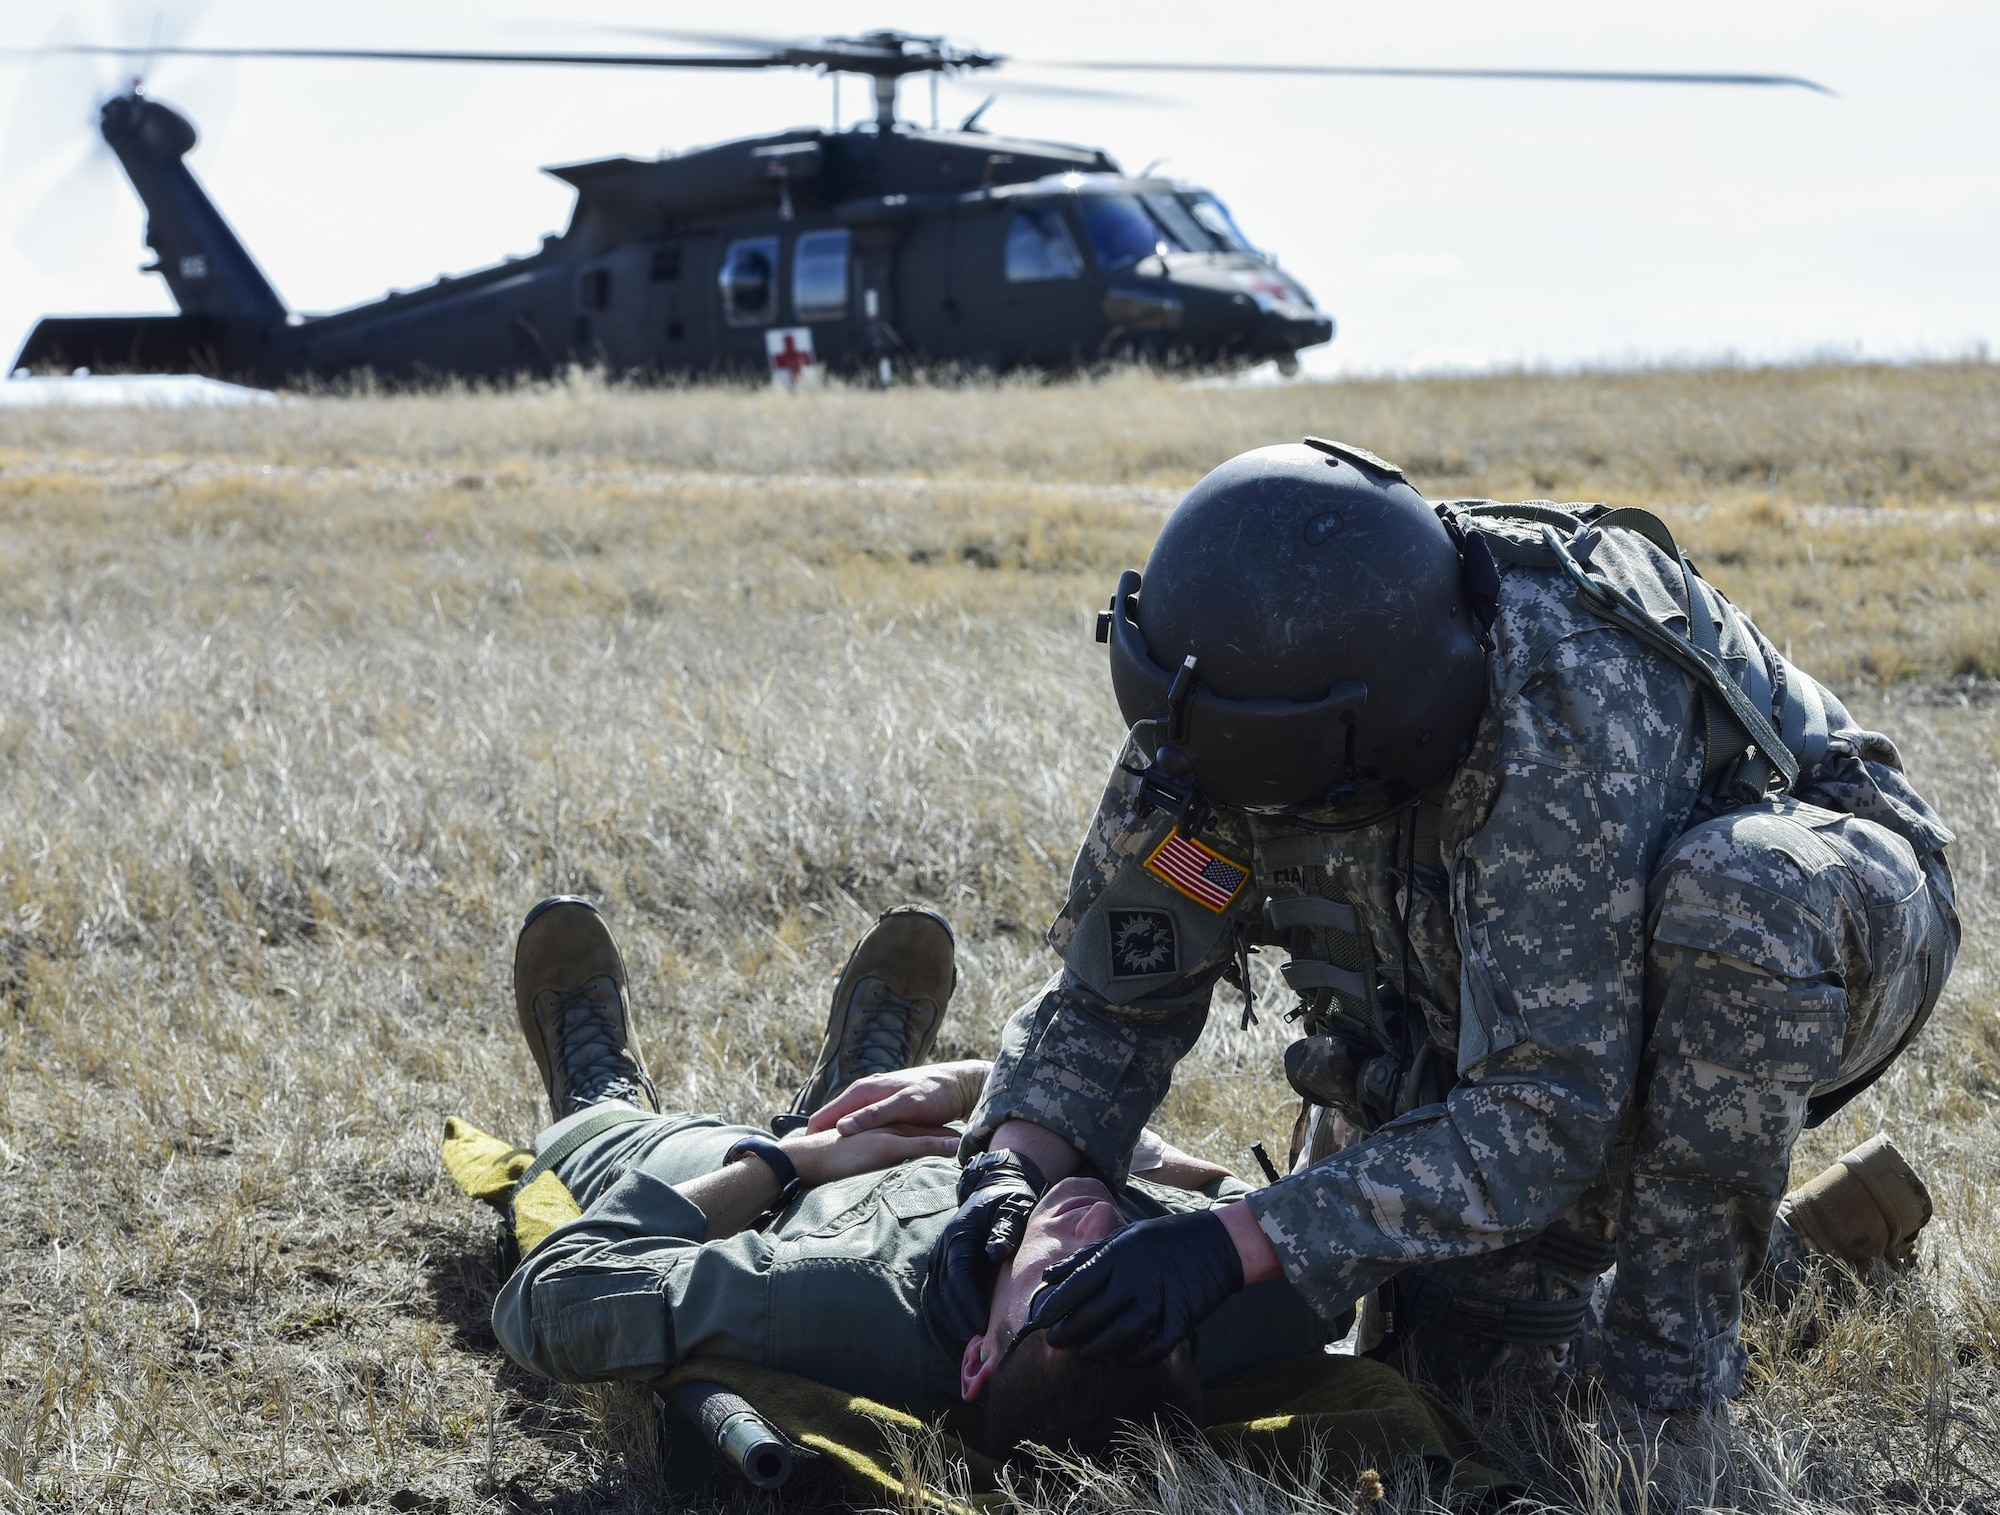 A U.S. Soldier with the South Dakota National Guard checks an Airman’s pulse during exercise Combat Raider at the Powder River Training Complex, March 15, 2017. Medical technicians with the SDNG participated in the exercise by providing a medical evacuation for Airmen acting as downed pilots. (U.S. Air Force photo by Airman 1st Class Randahl J. Jenson)